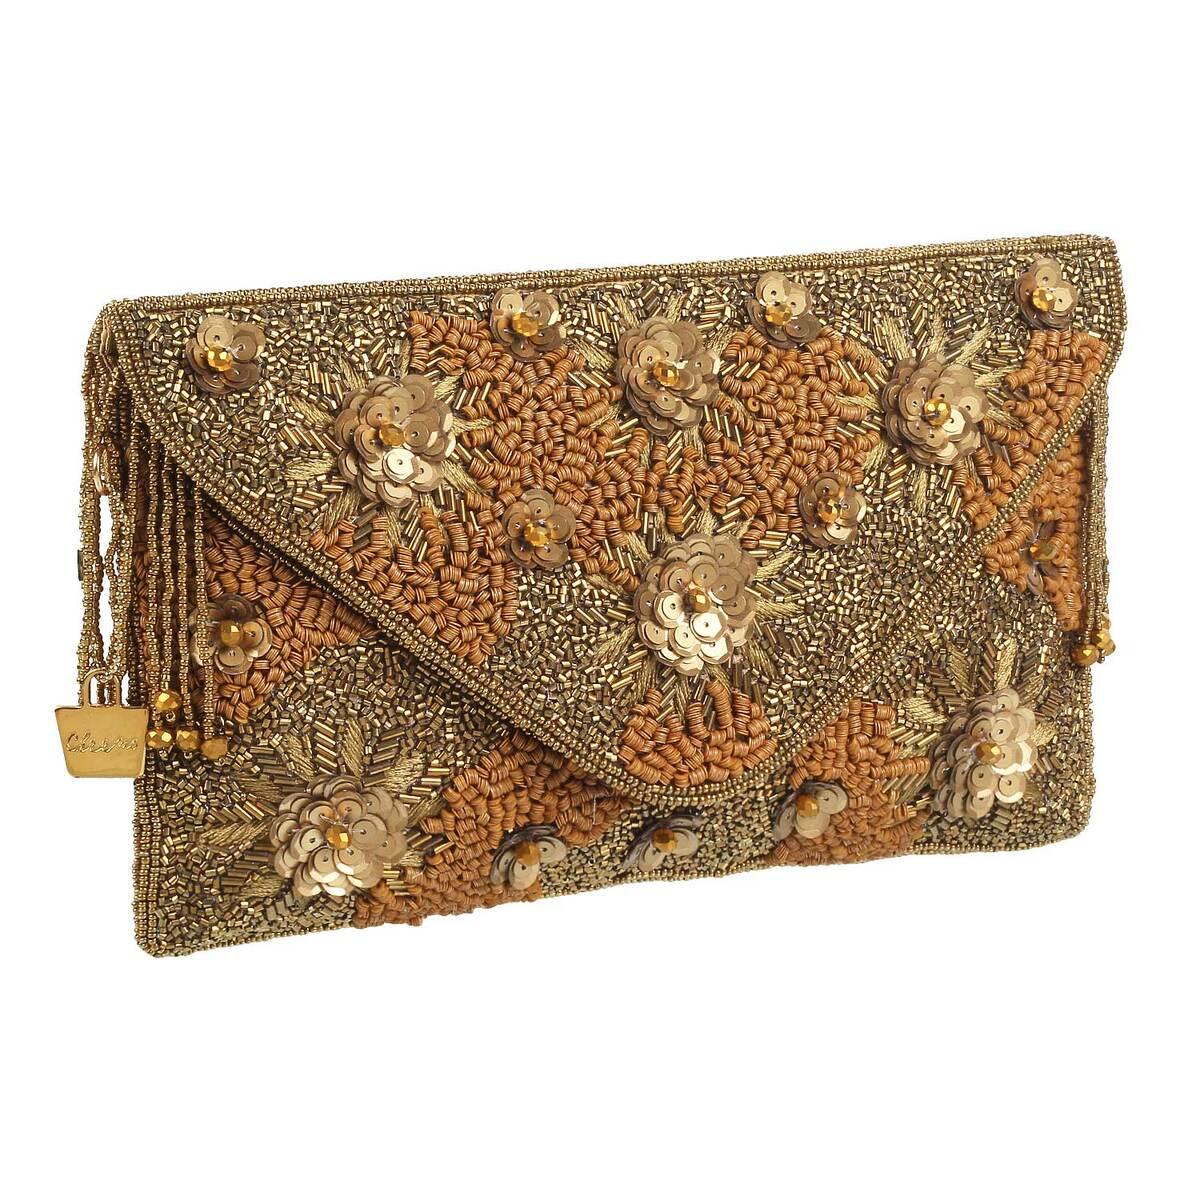 Buy Black Silk Pearl Clutch Purse, Bag With Gold Embroidery, Sequin Work,  Zardozi Work and Leaf Pattern for Western and Traditional Outfit. Online in  India - Etsy